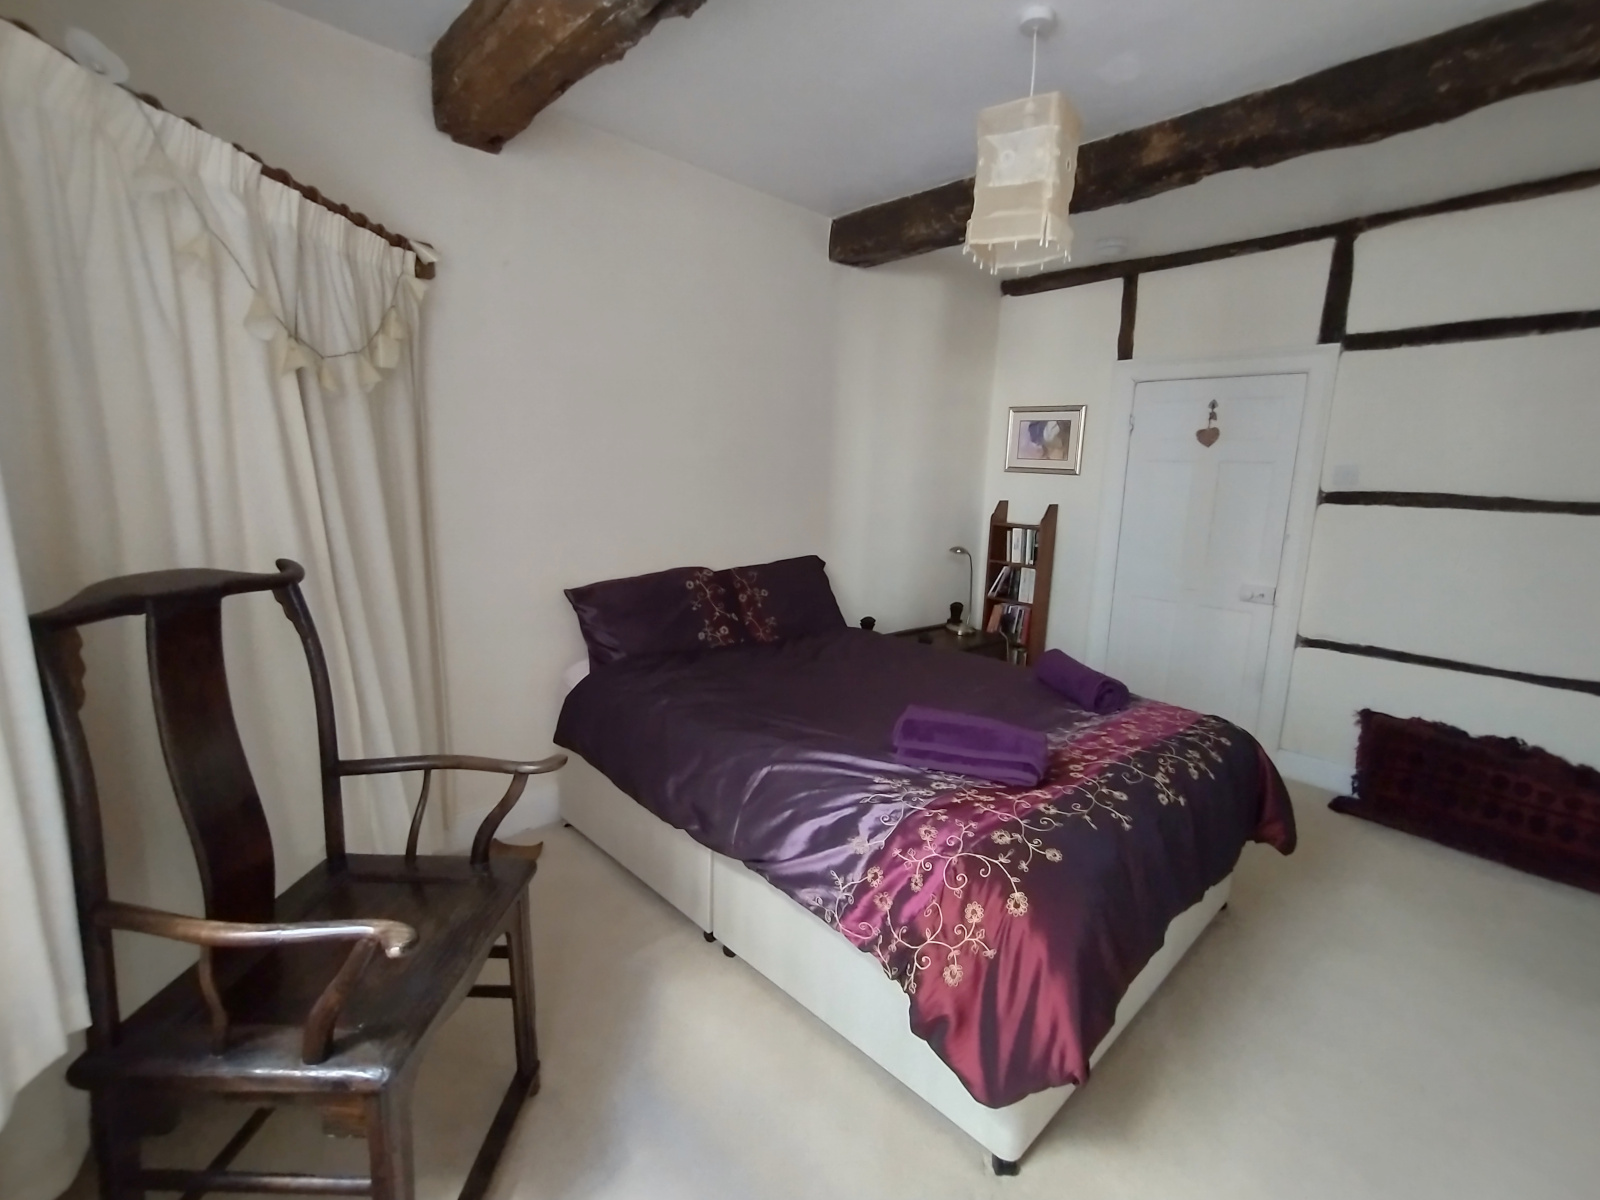 Cosy and characterful bedroom with beams